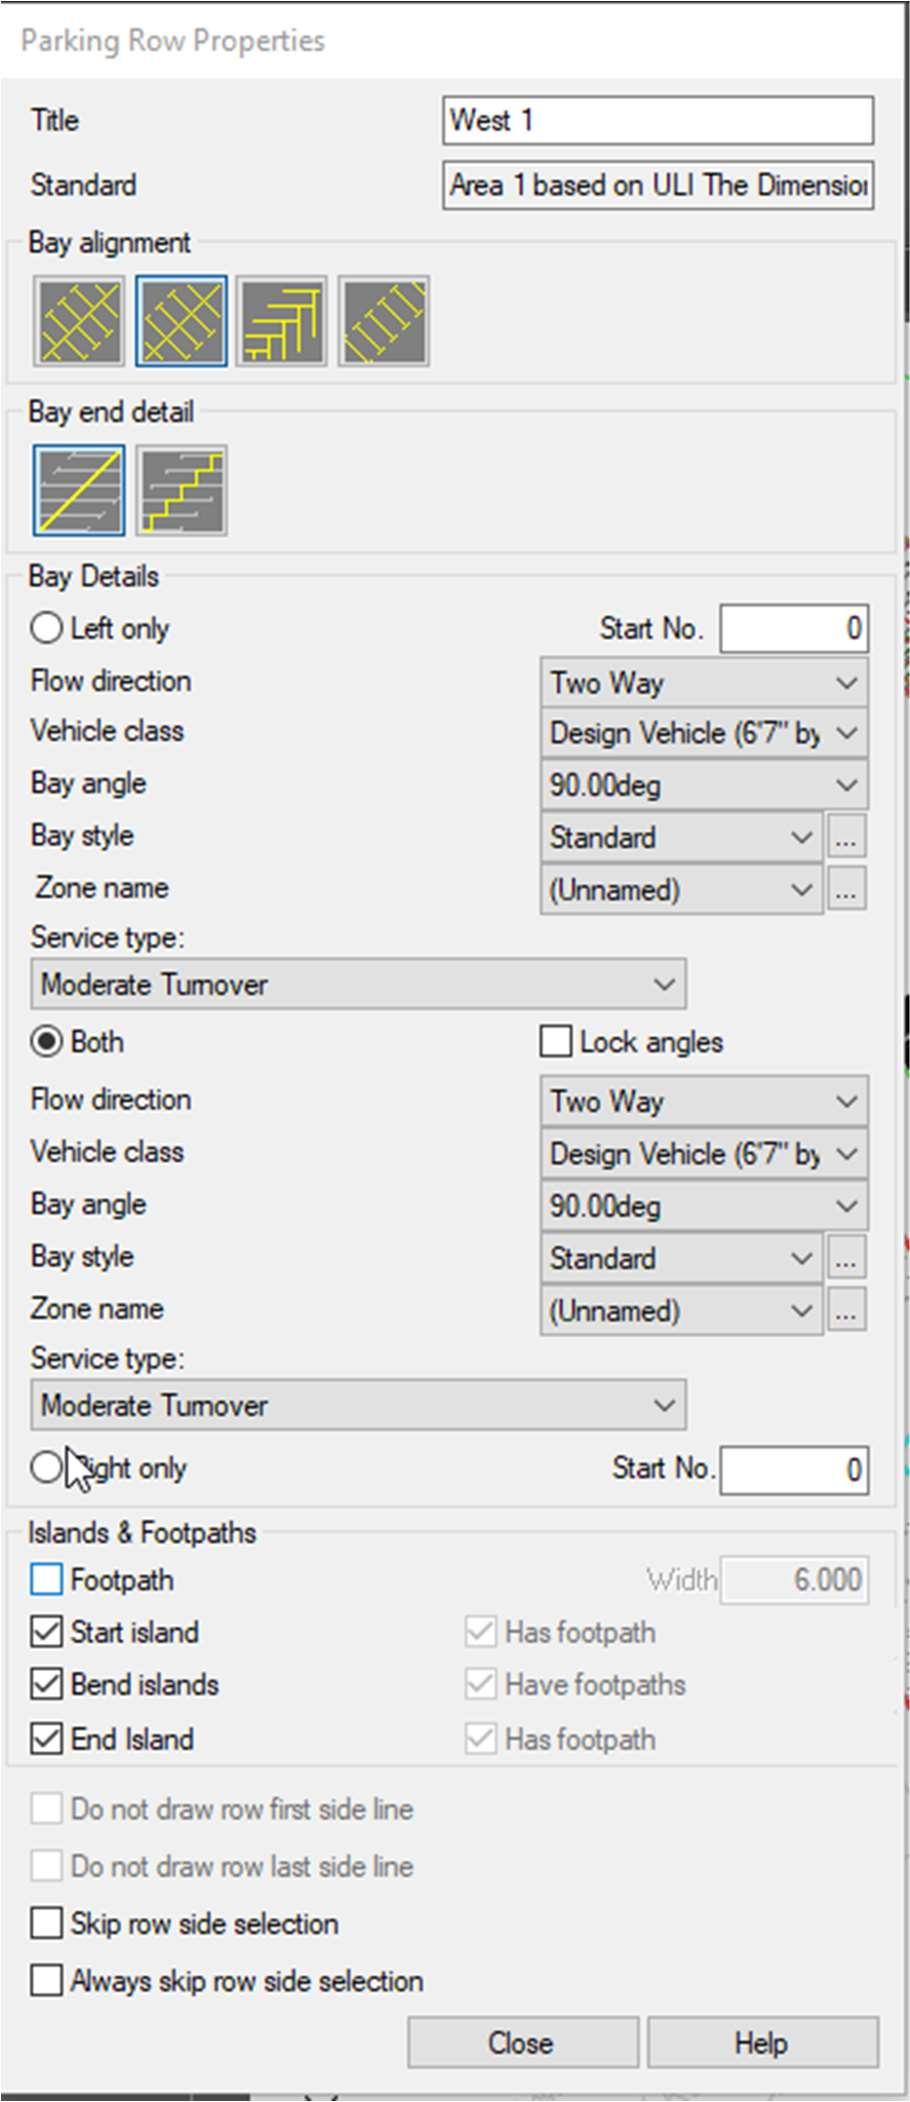 Finally, in the Parking Row Properties dialog, give the parking row you re about to lay out a name or Title. Then, select the Bay alignment and Bay end details.